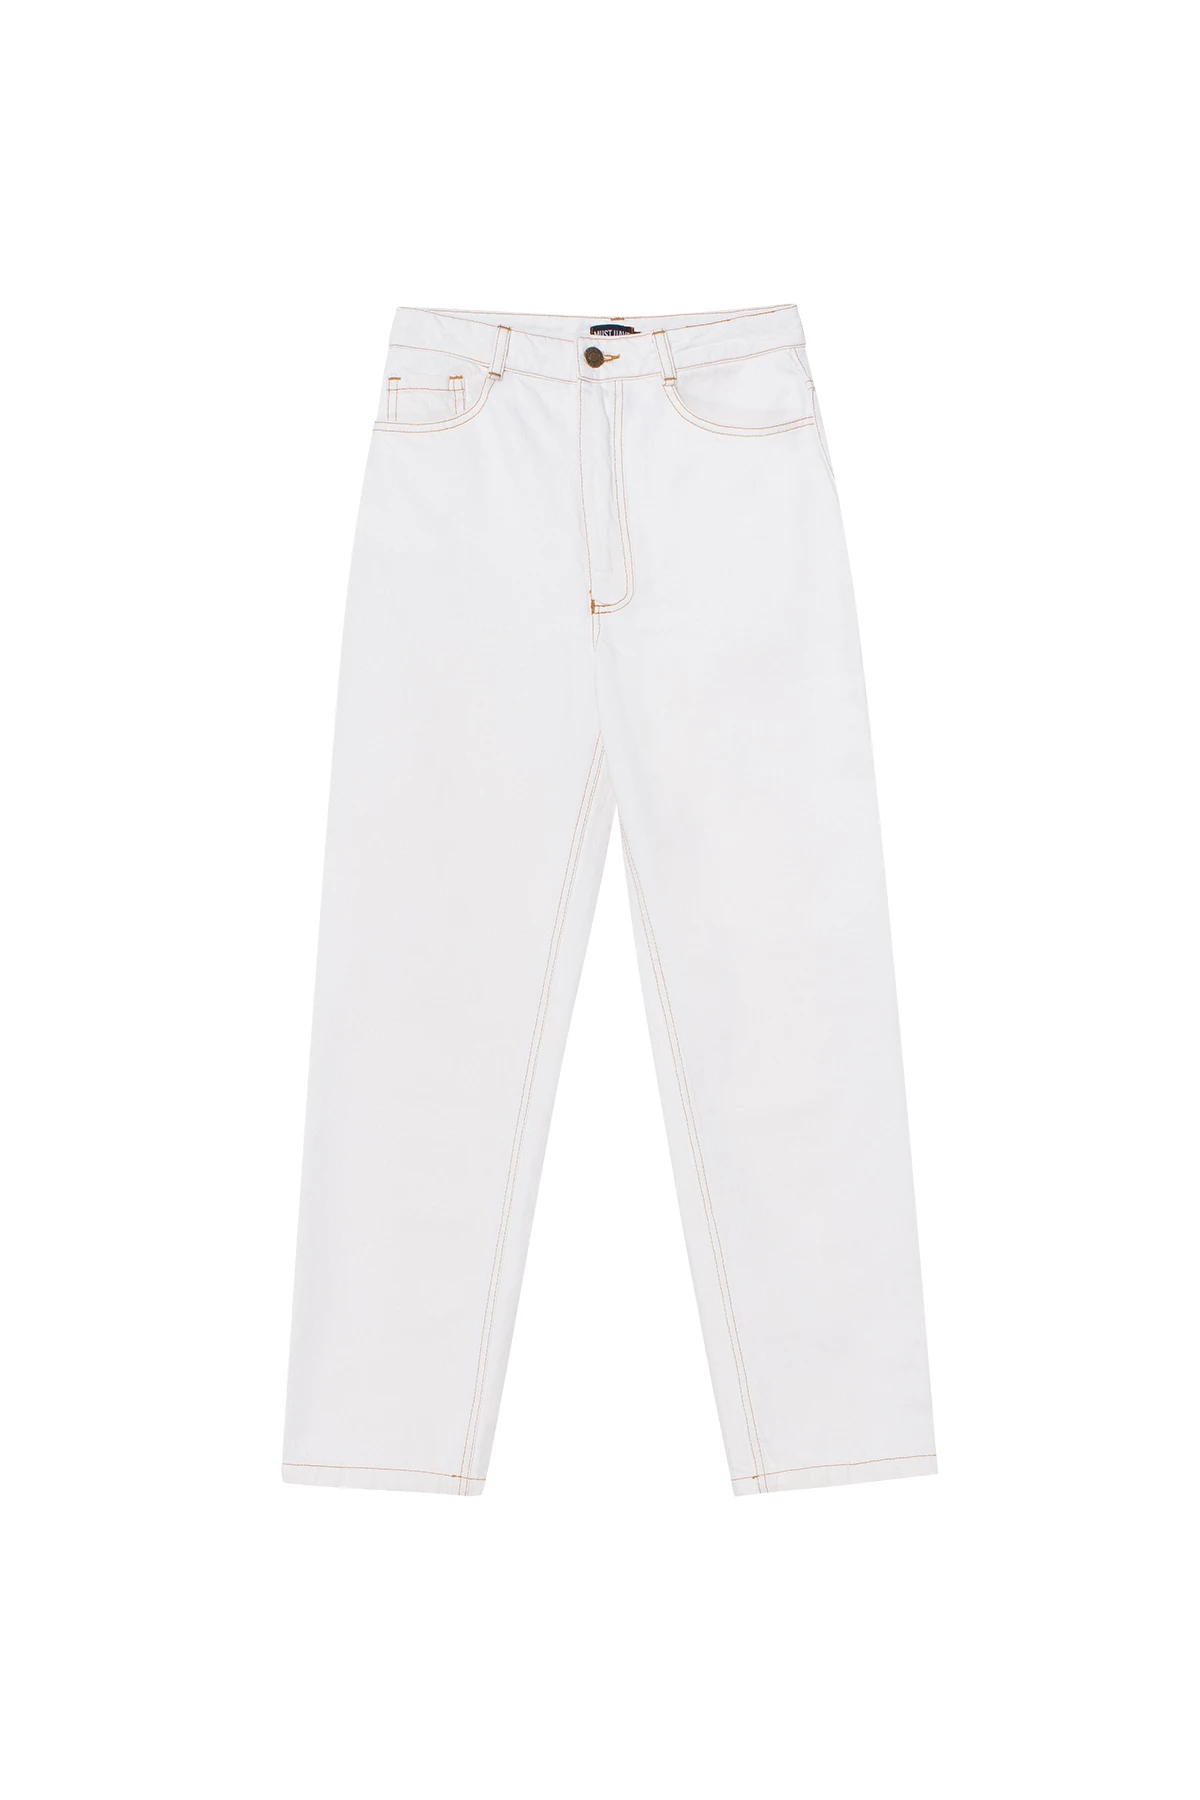 Cropped mom fit light milky denim jeans, photo 6